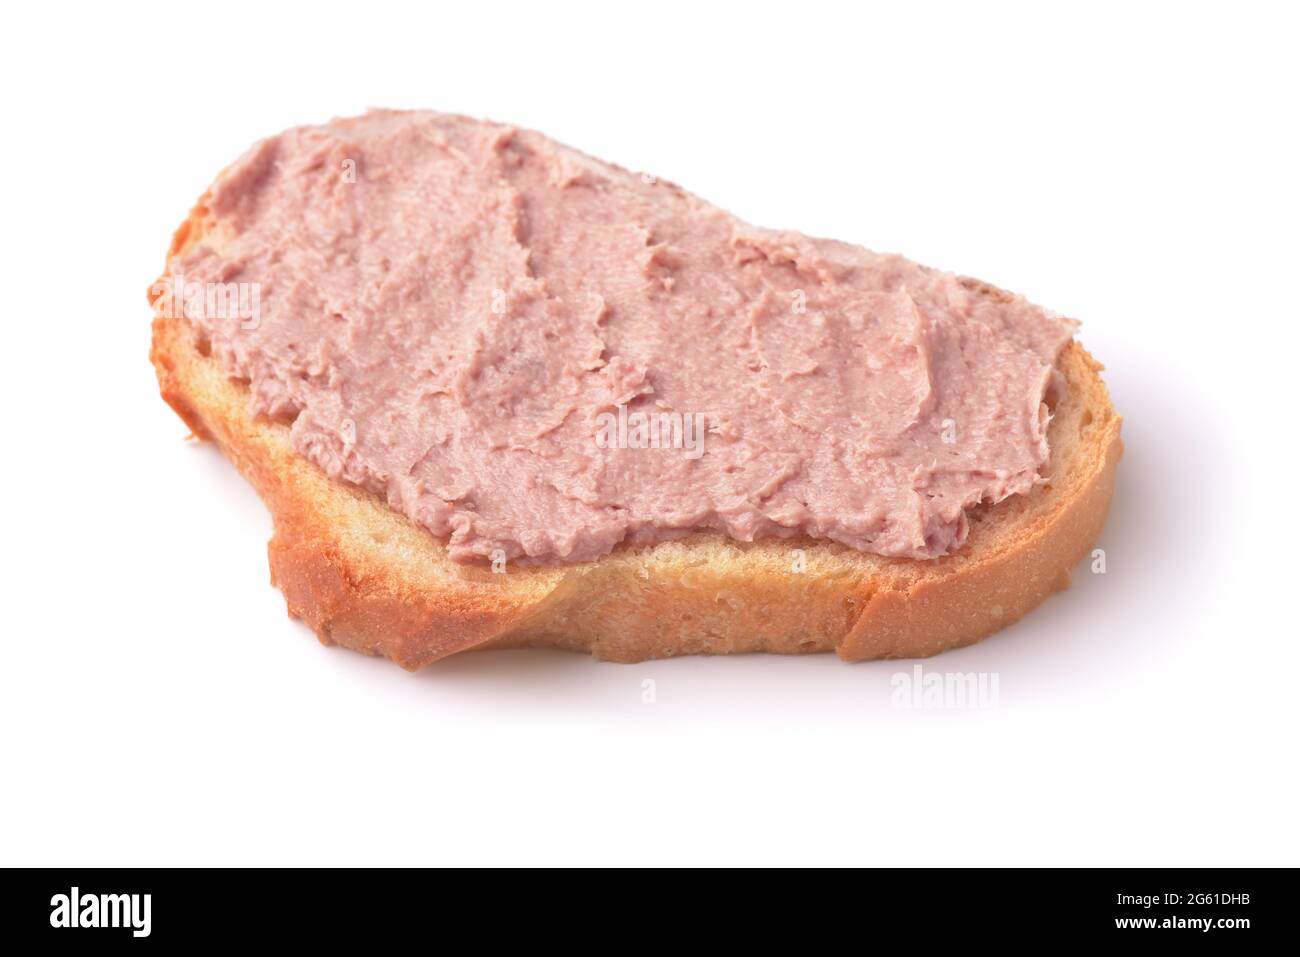 Slice of wheat bread with liver pate isolated on white Stock Photo